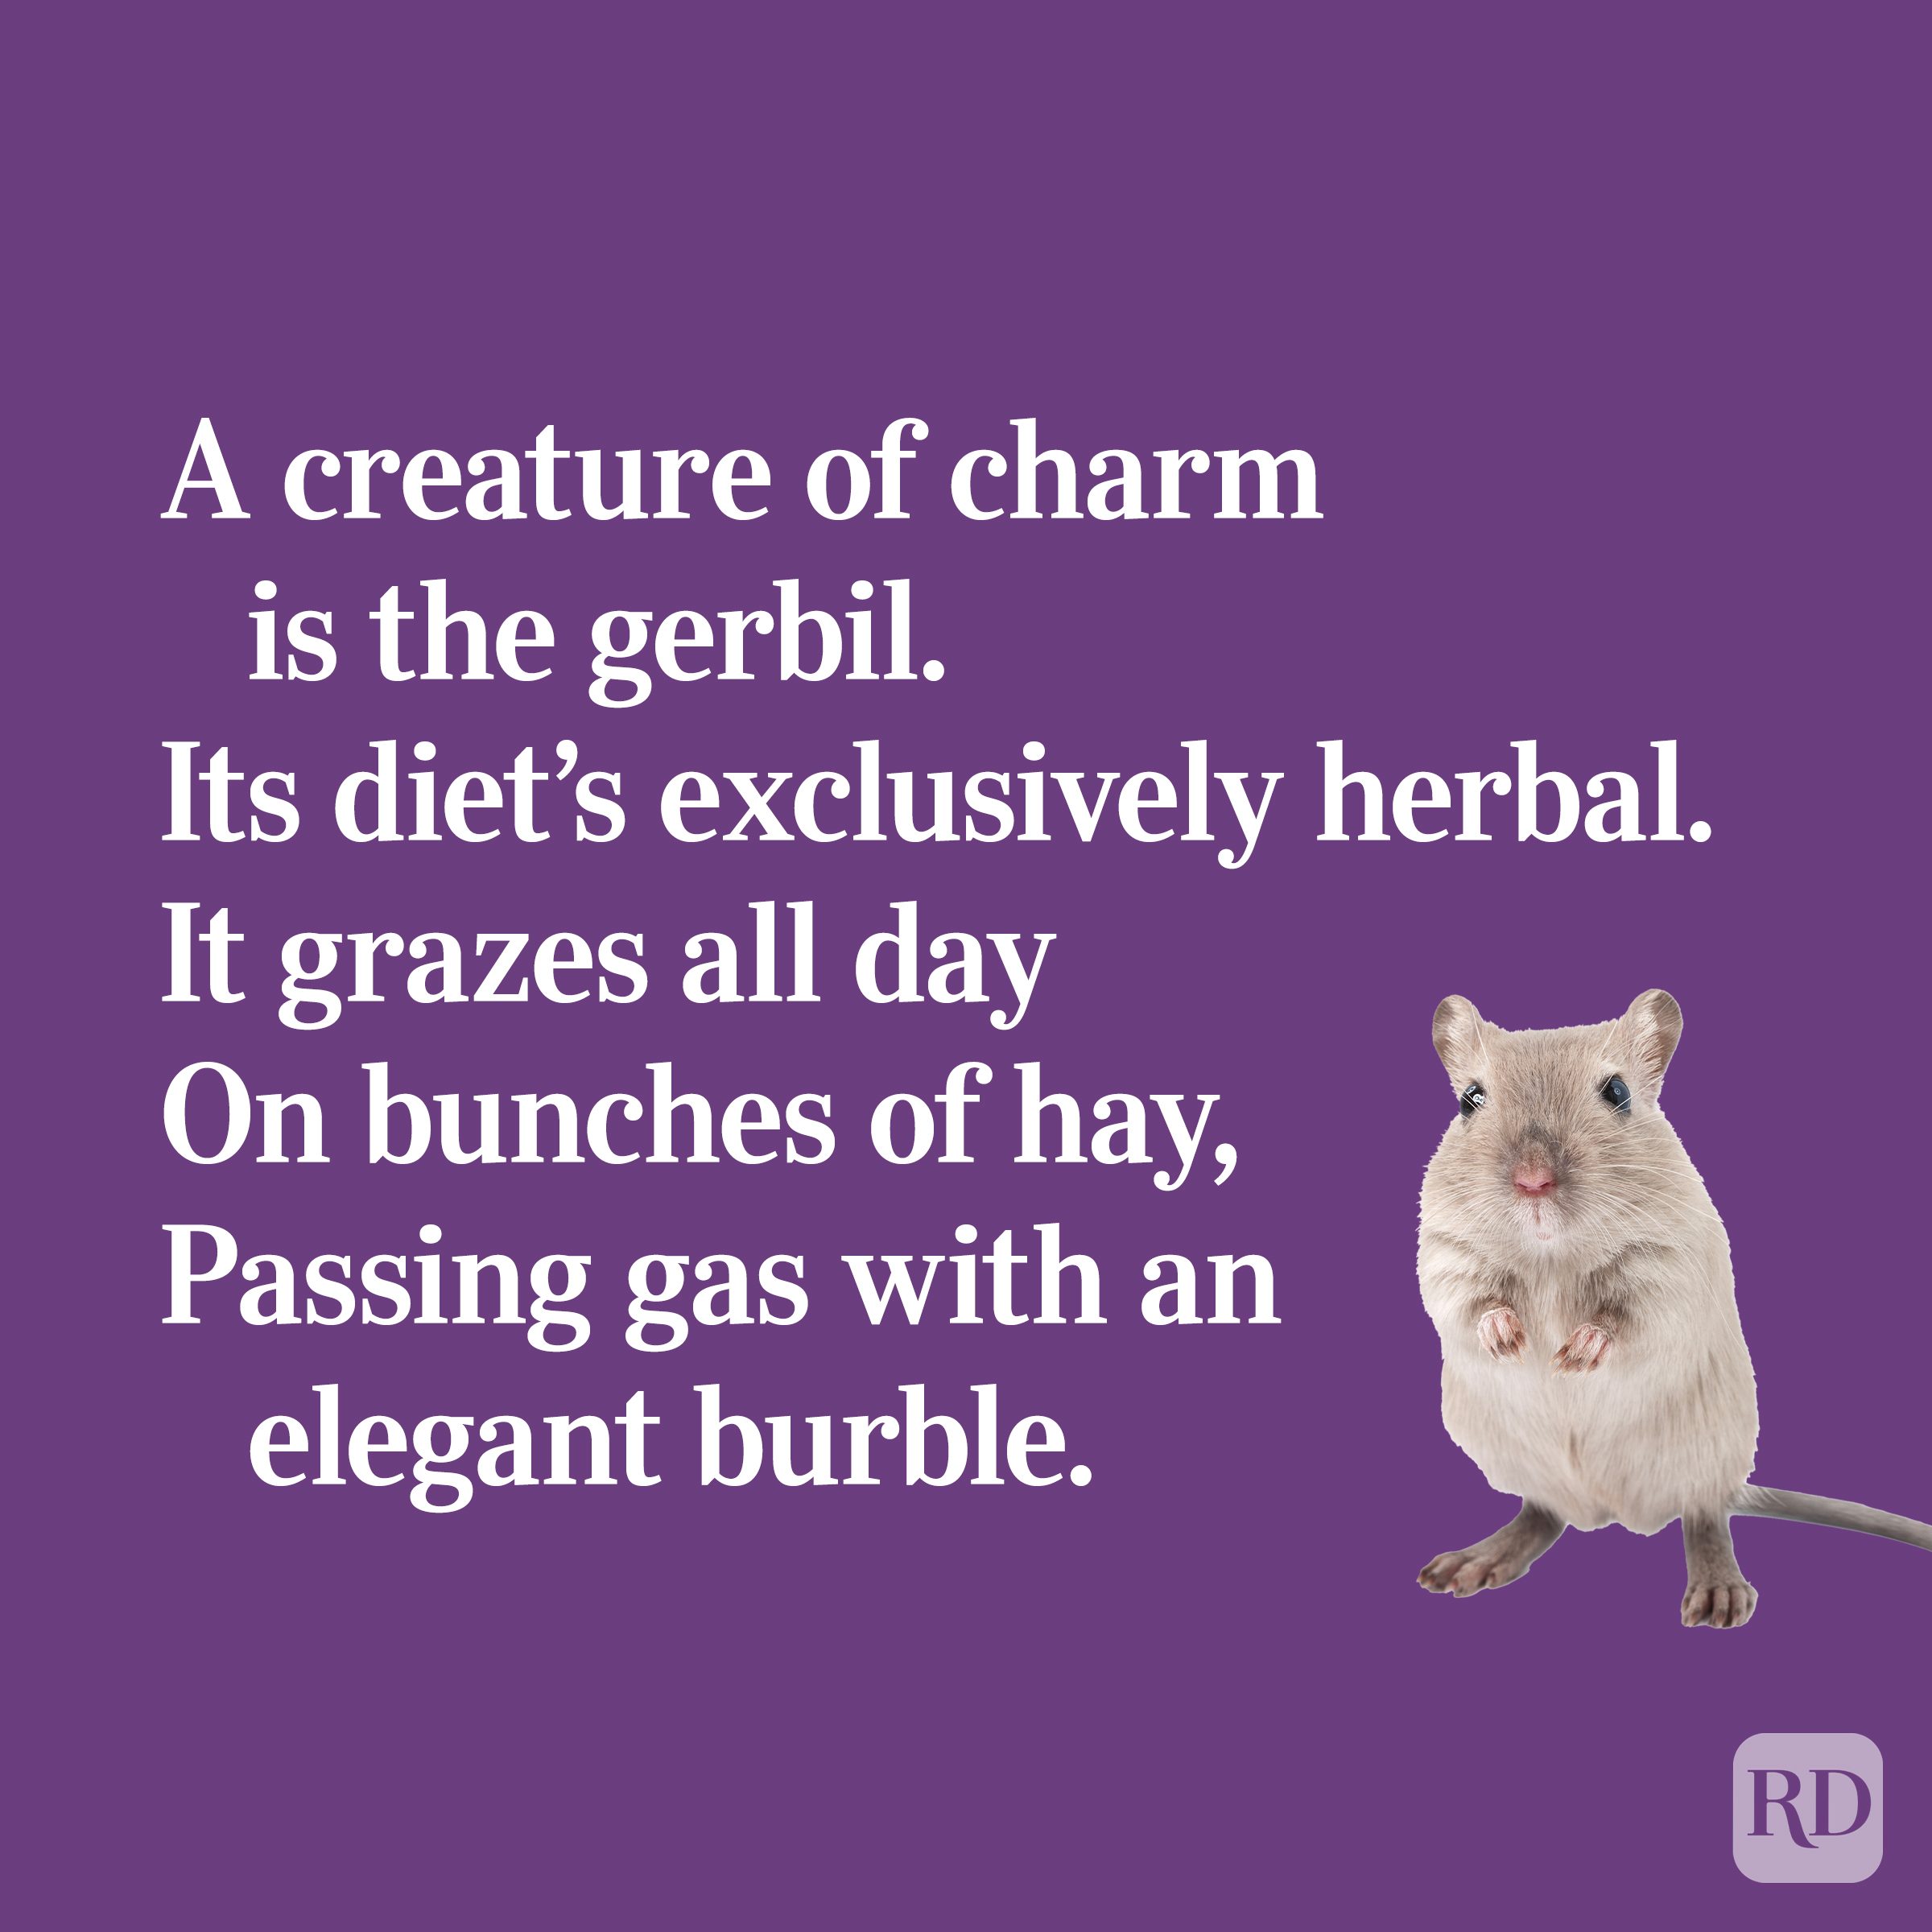 Quirky limerick about gerbils